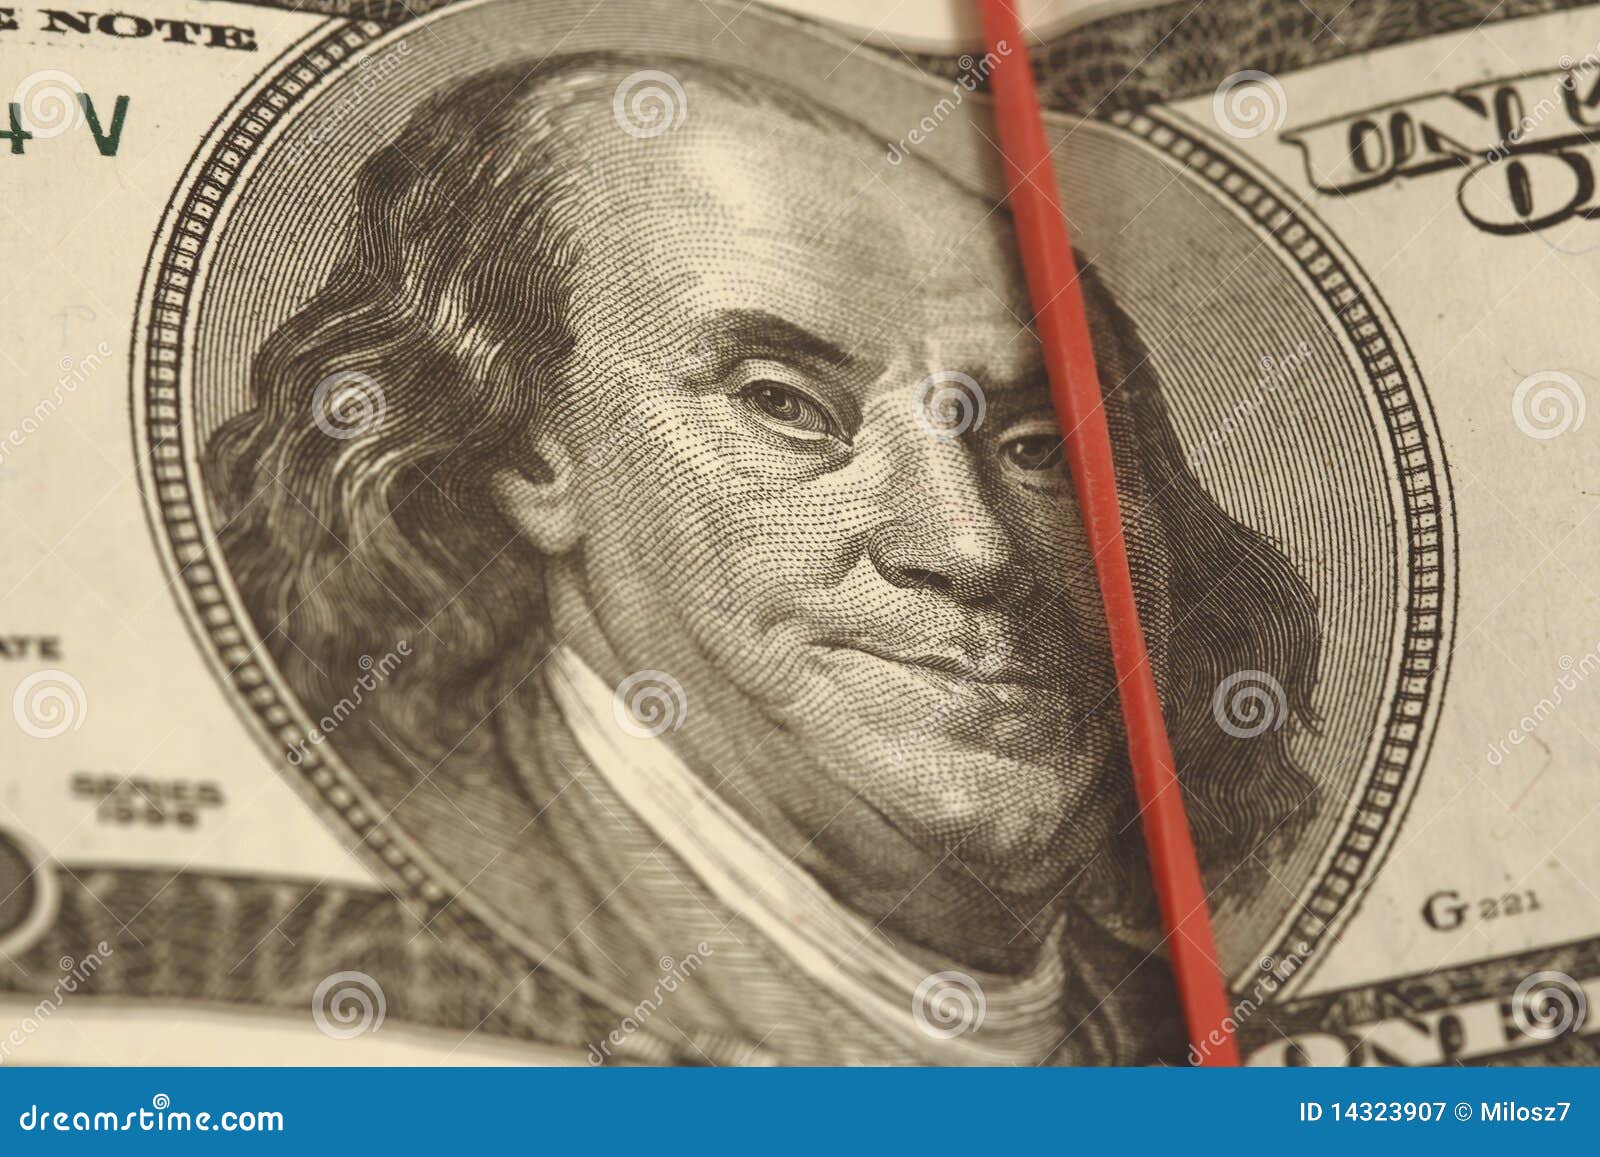 Us currency banknote stock image. Image of profits, legal 14323907